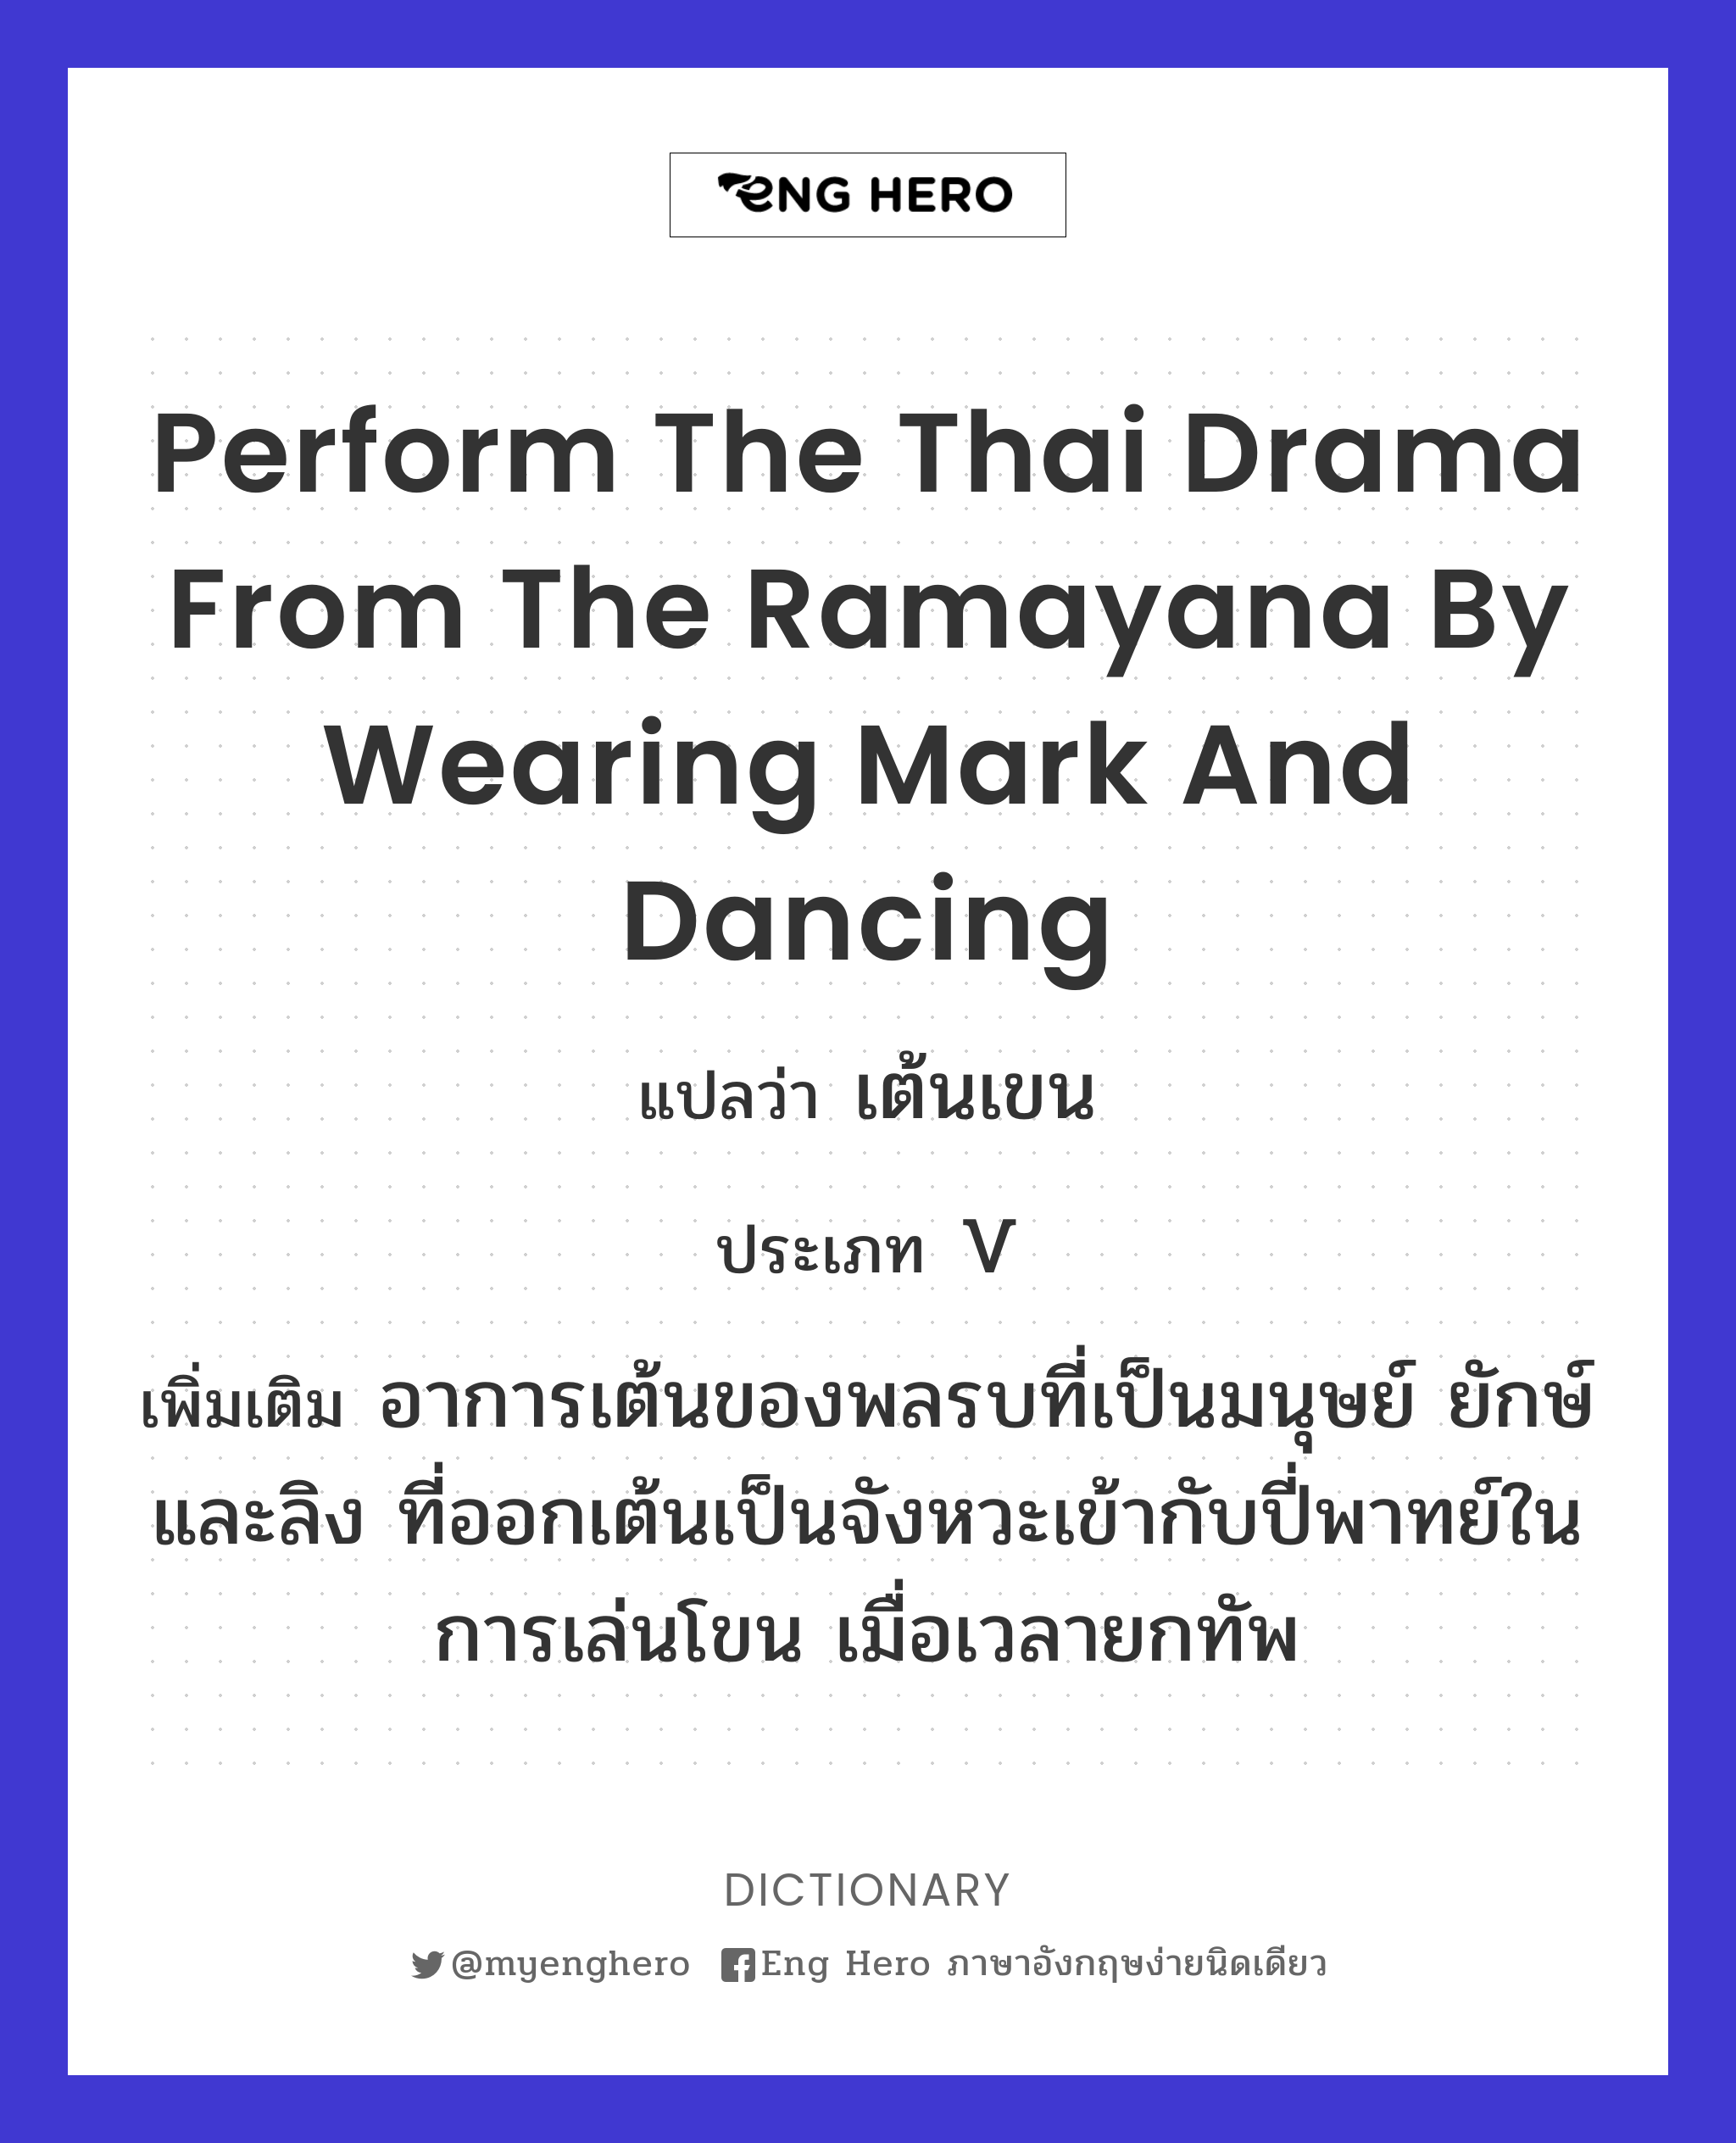 perform the Thai drama from the Ramayana by wearing mark and dancing